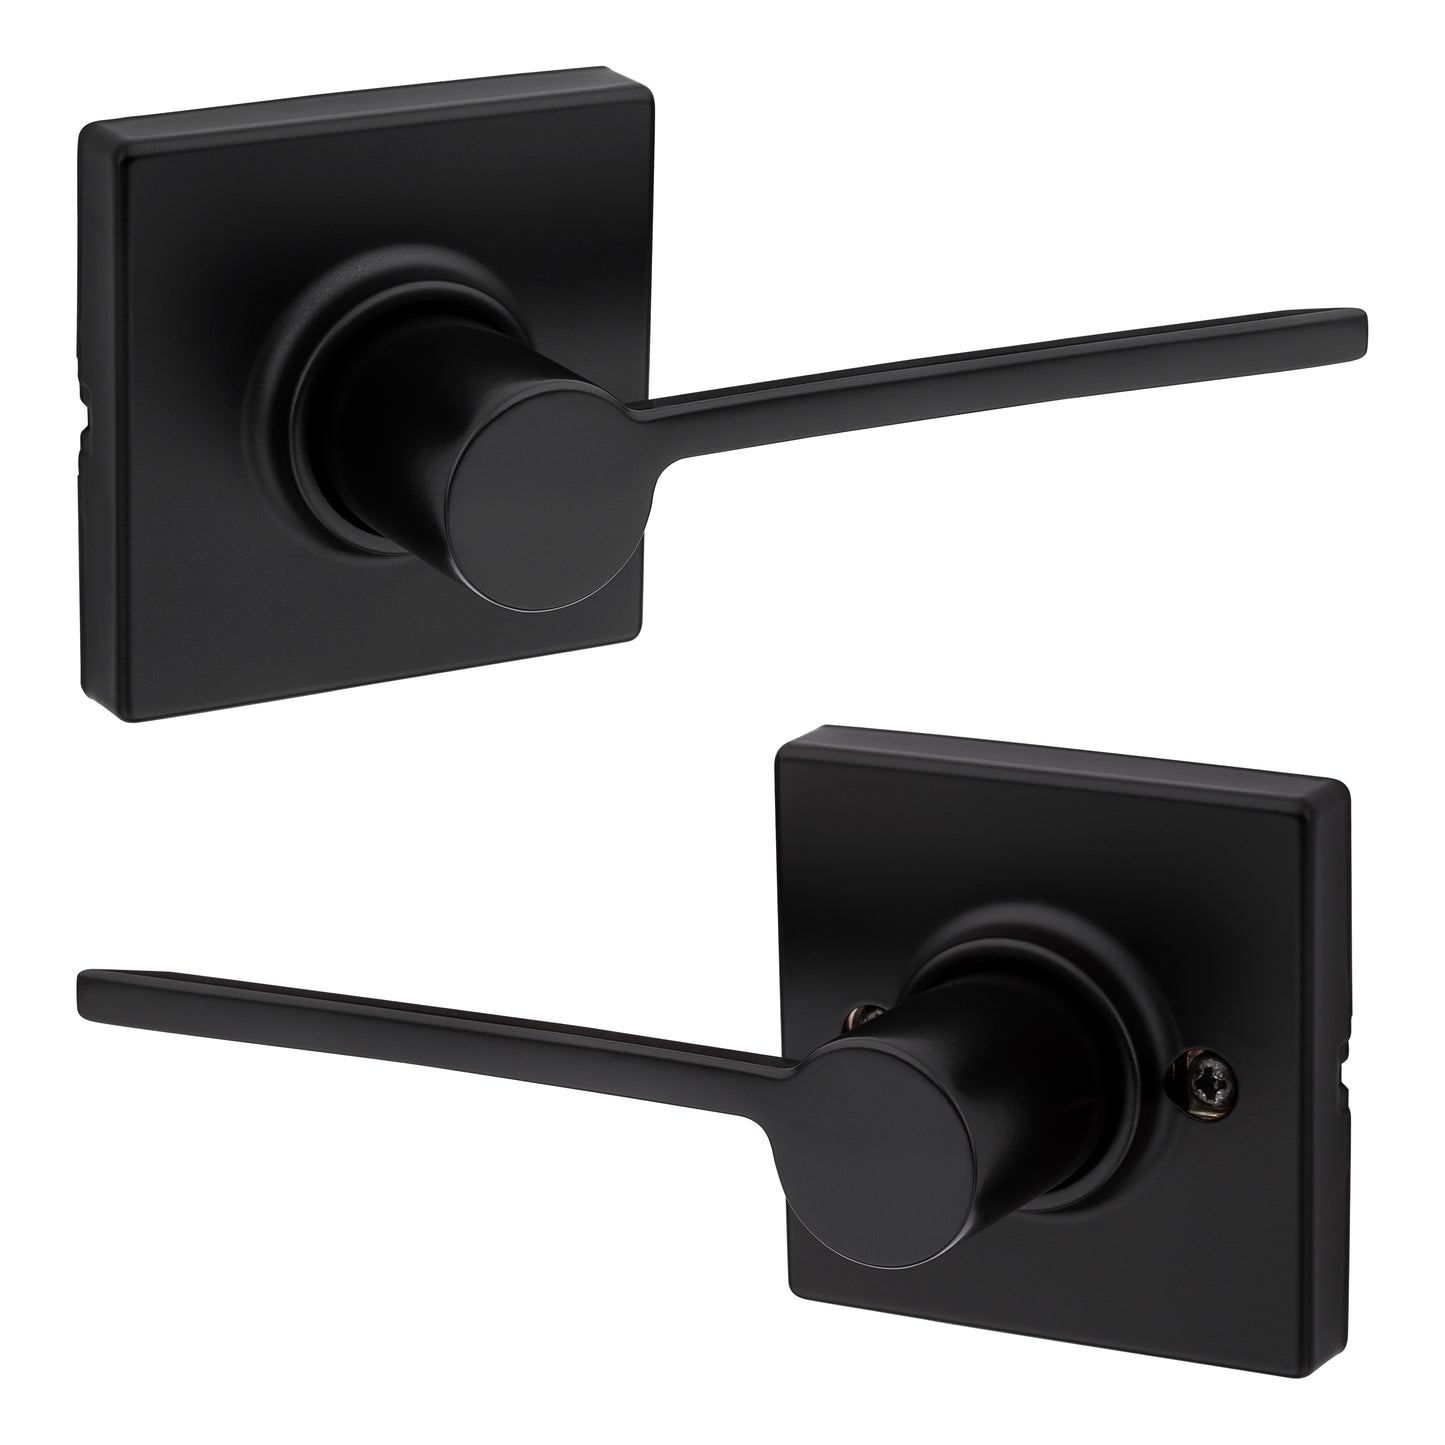 Kwikset 200LRLSQT-514 Ladera Lever with Square Rose Passage Door Lock with 6AL Latch and RCS Strike Matte Black Finish